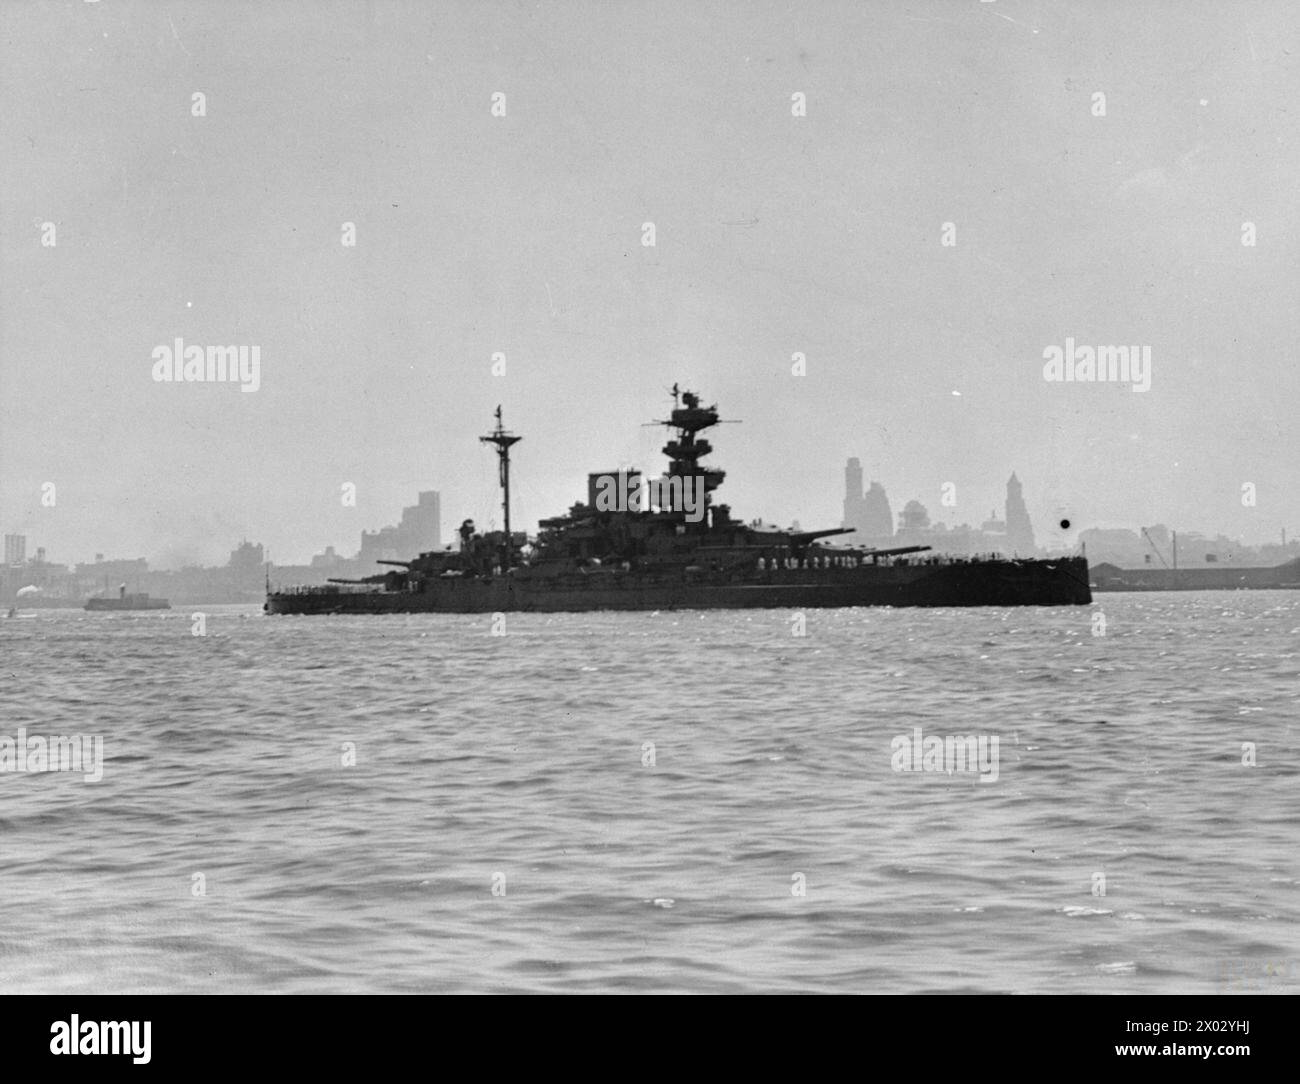 HMS MALAYA LEAVING NEW YORK HARBOUR AFTER REPAIRS, 9 JULY 1941 - HMS MALAYA leaving New York after refit in the United States. The city can be seen in the background  Royal Navy, MALAYA (HMS) Stock Photo